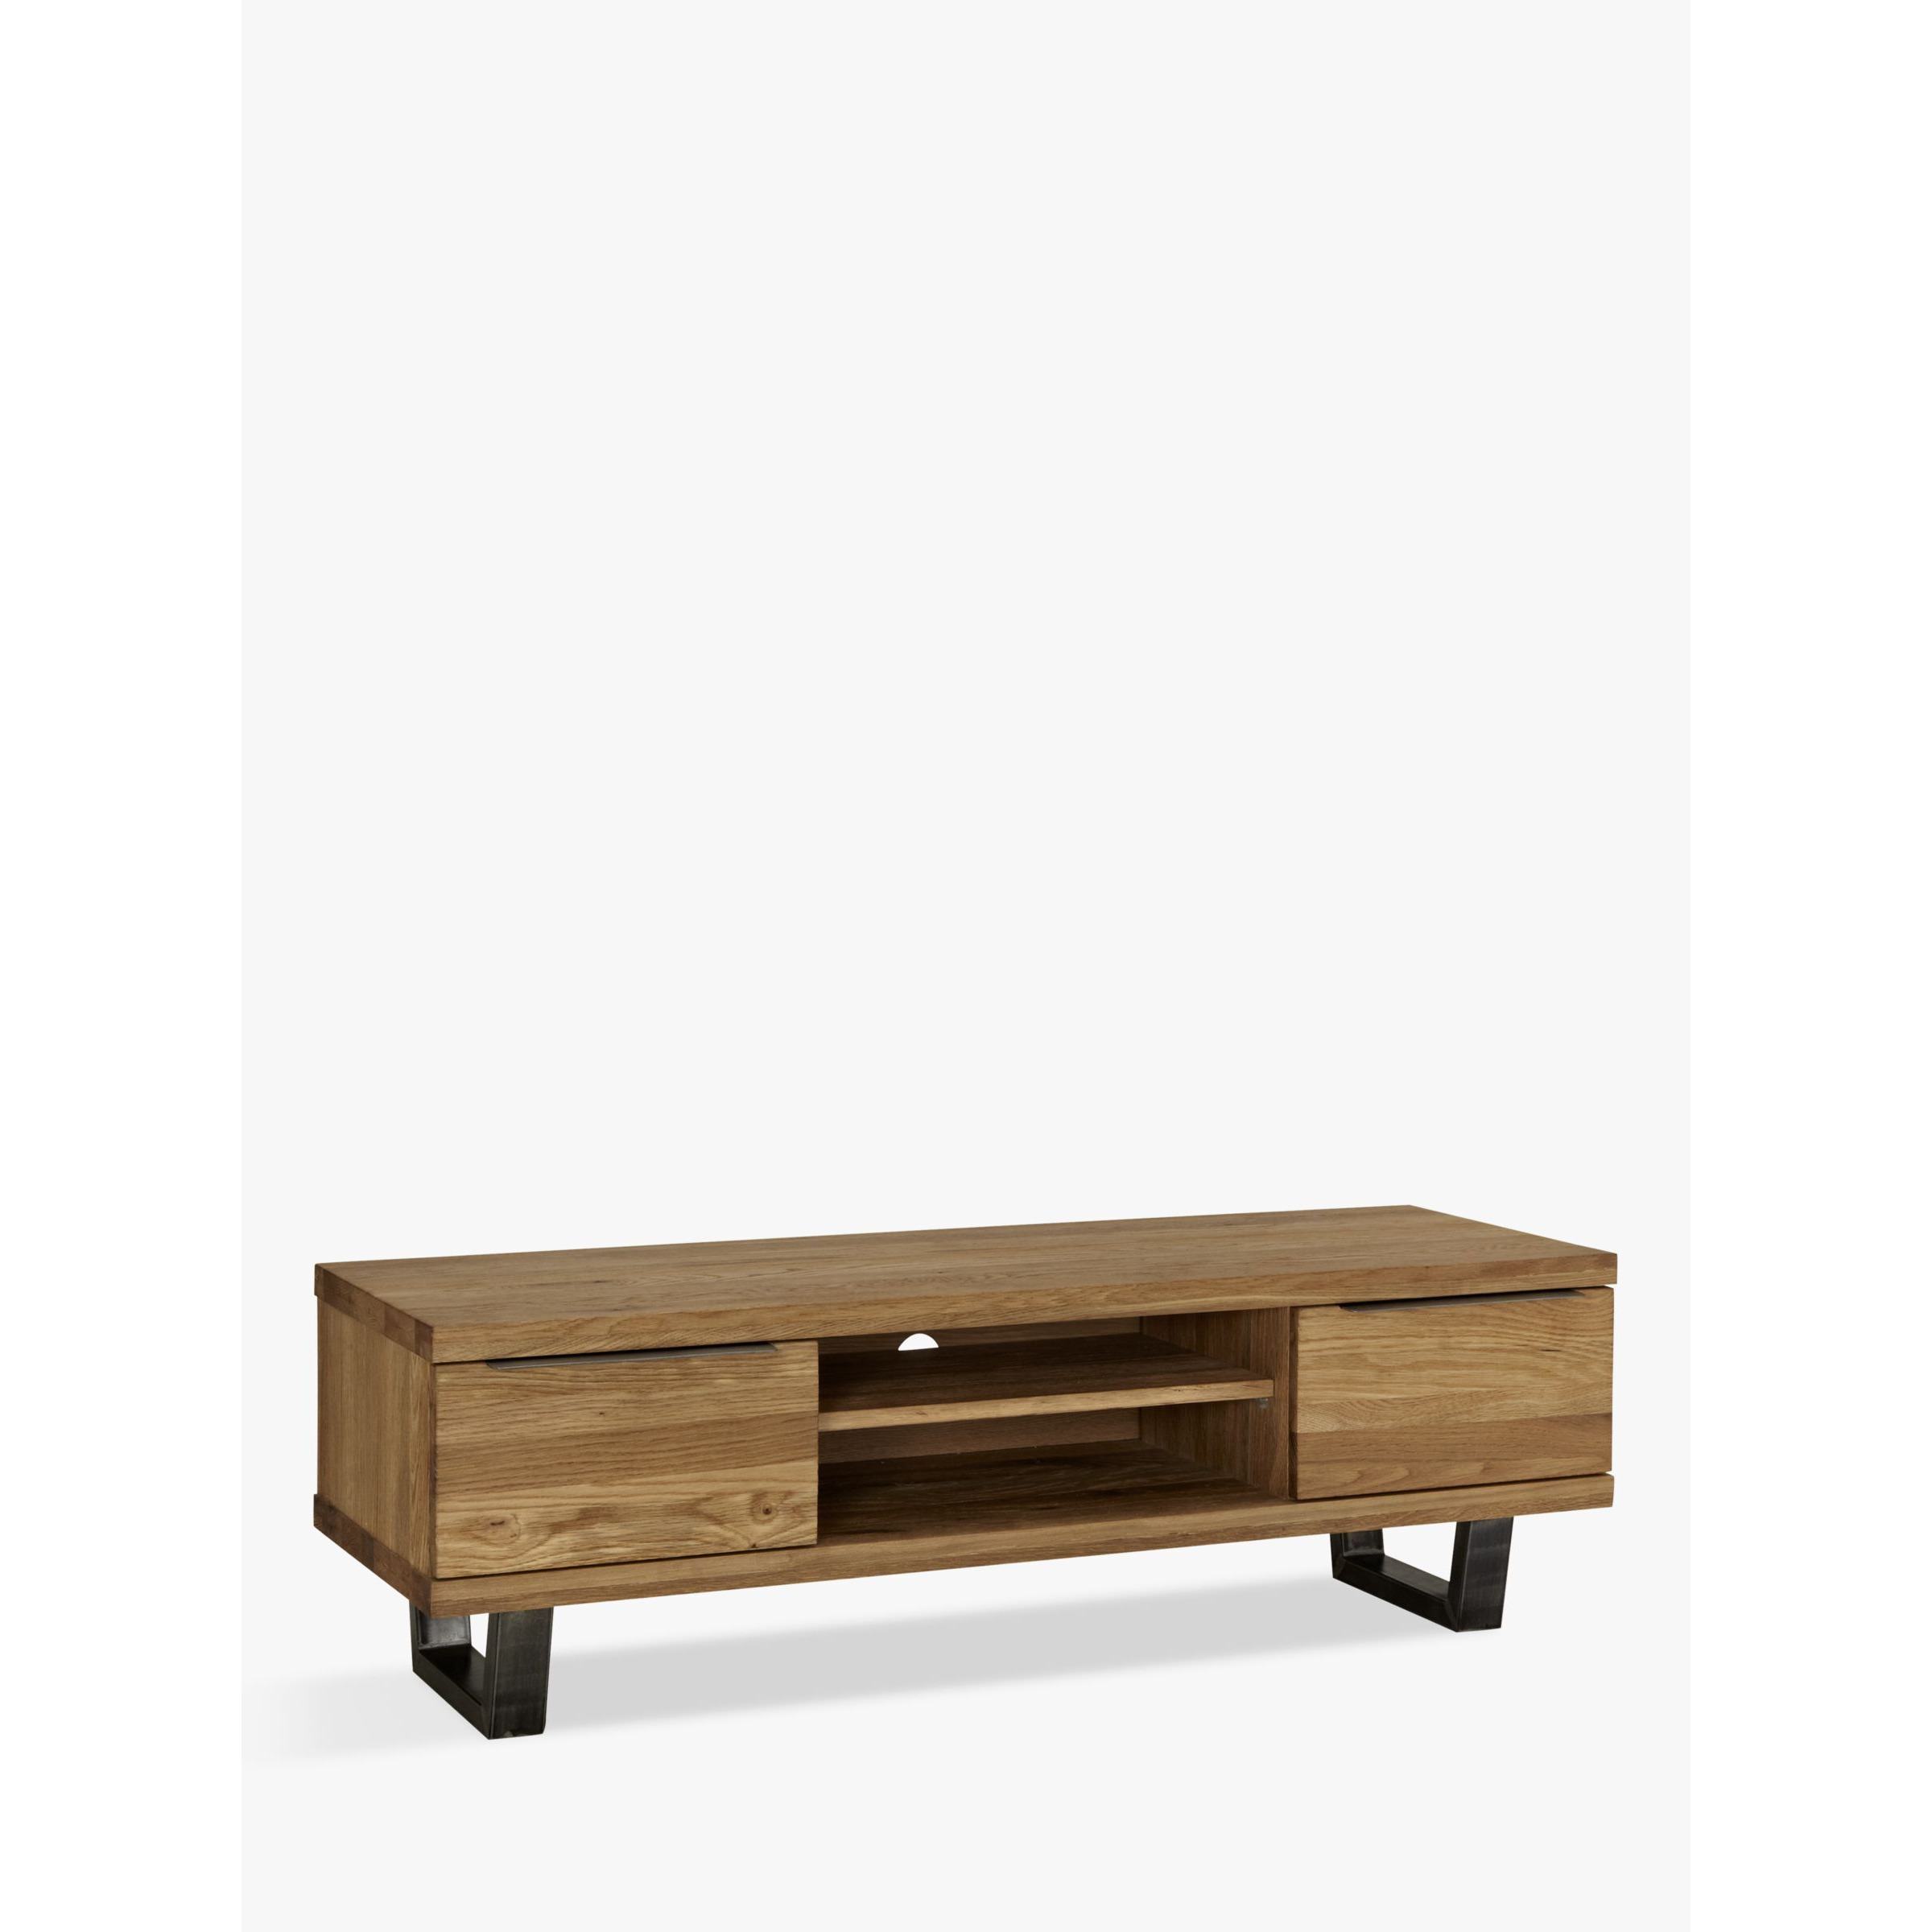 "John Lewis Calia TV Stand for TVs up to 60""" - image 1